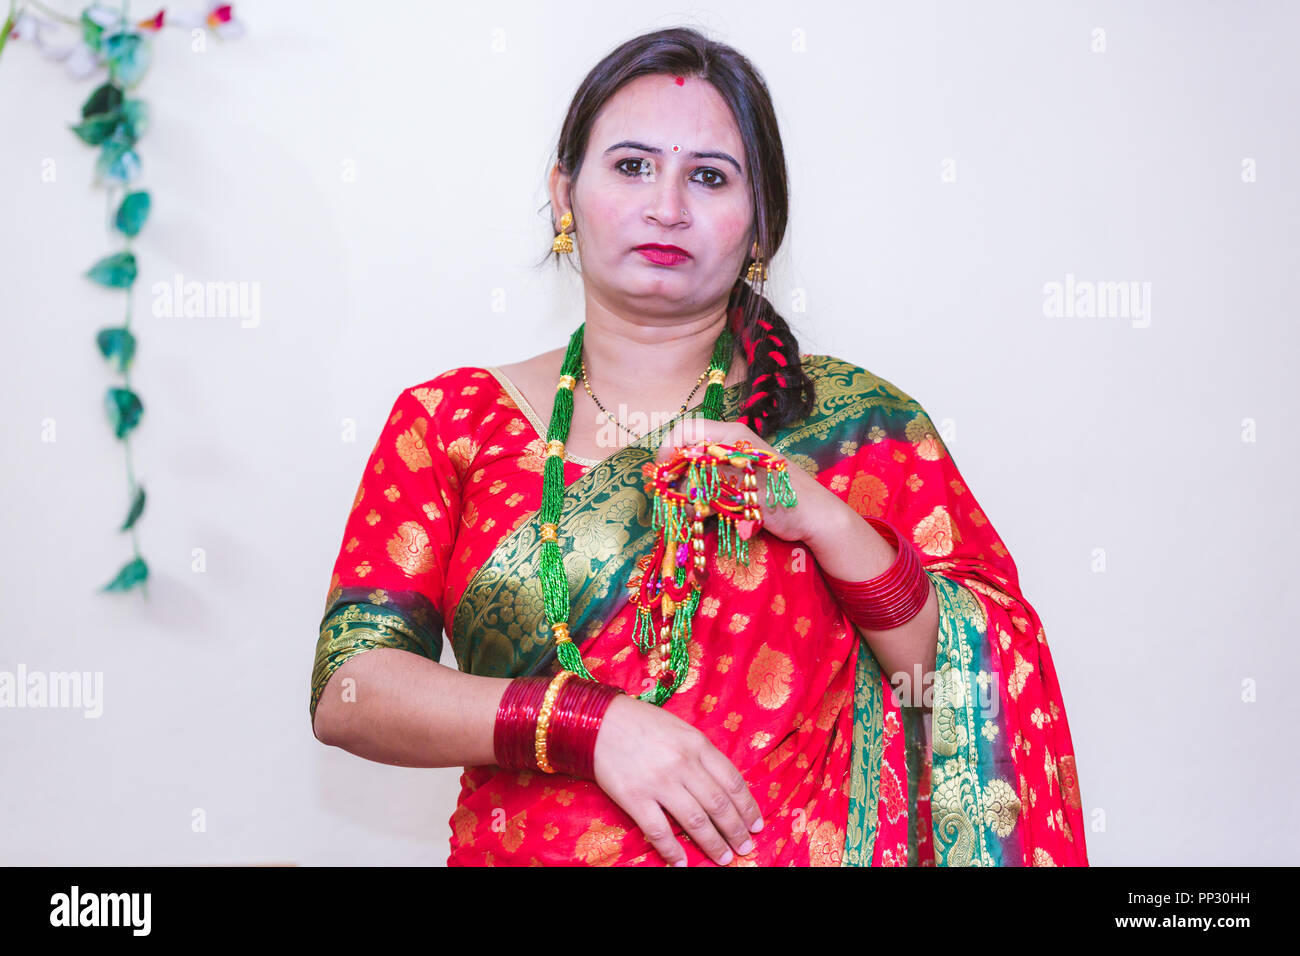 Beautiful Nepali Women In A Traditional Dress Up With Wearing Saree And